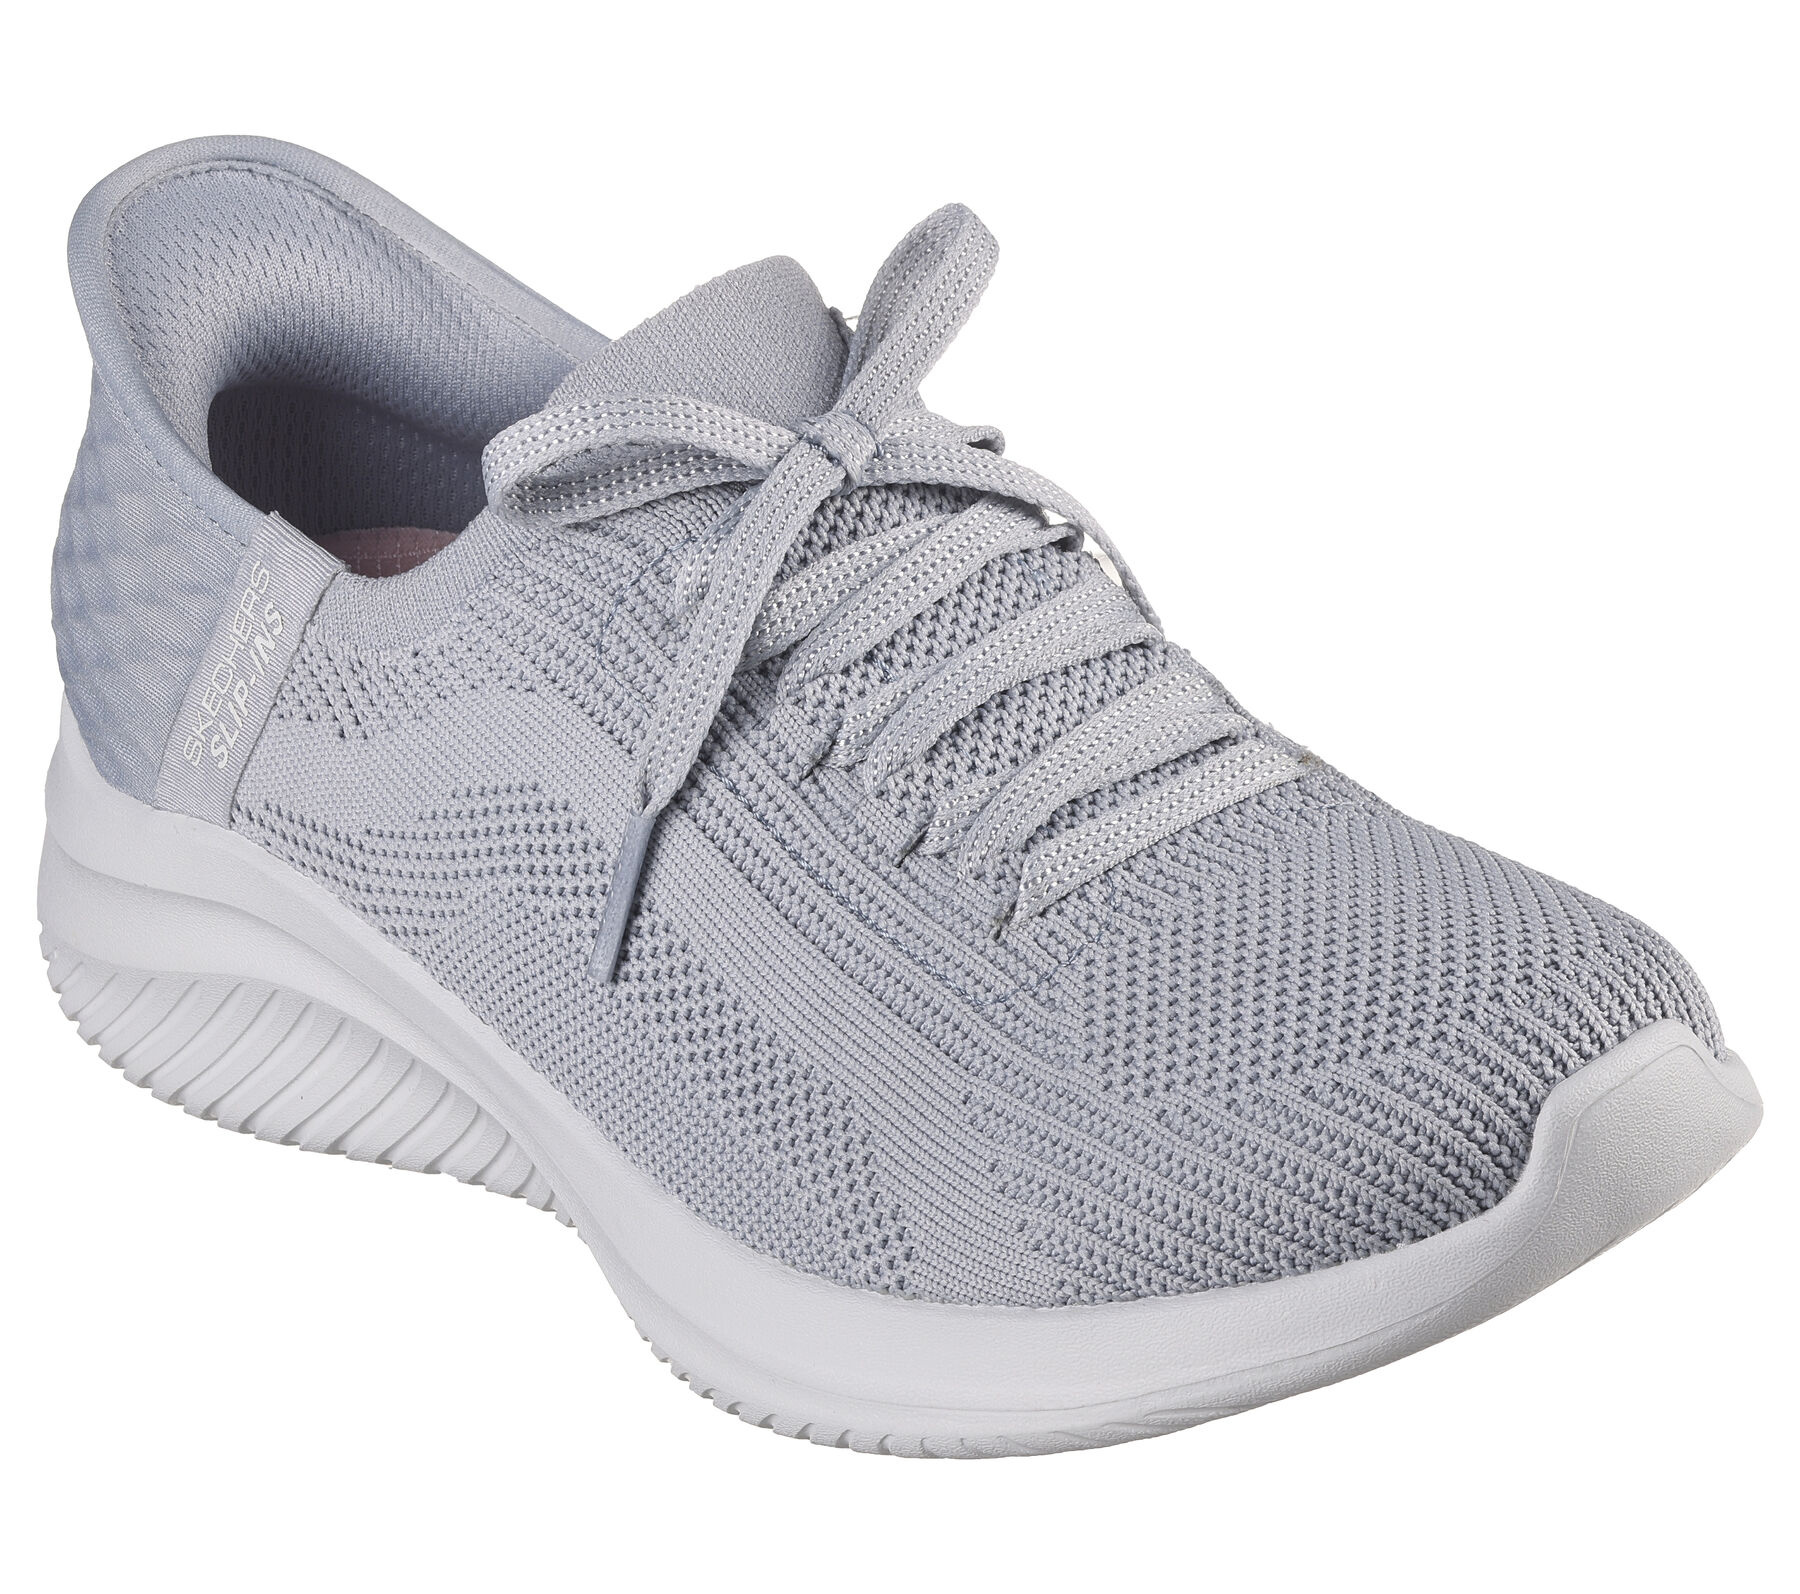 Skechers Slip-ins: Ultra Flex 3.0 - Brilliant Path - Traditions Clothing & Gift Shop